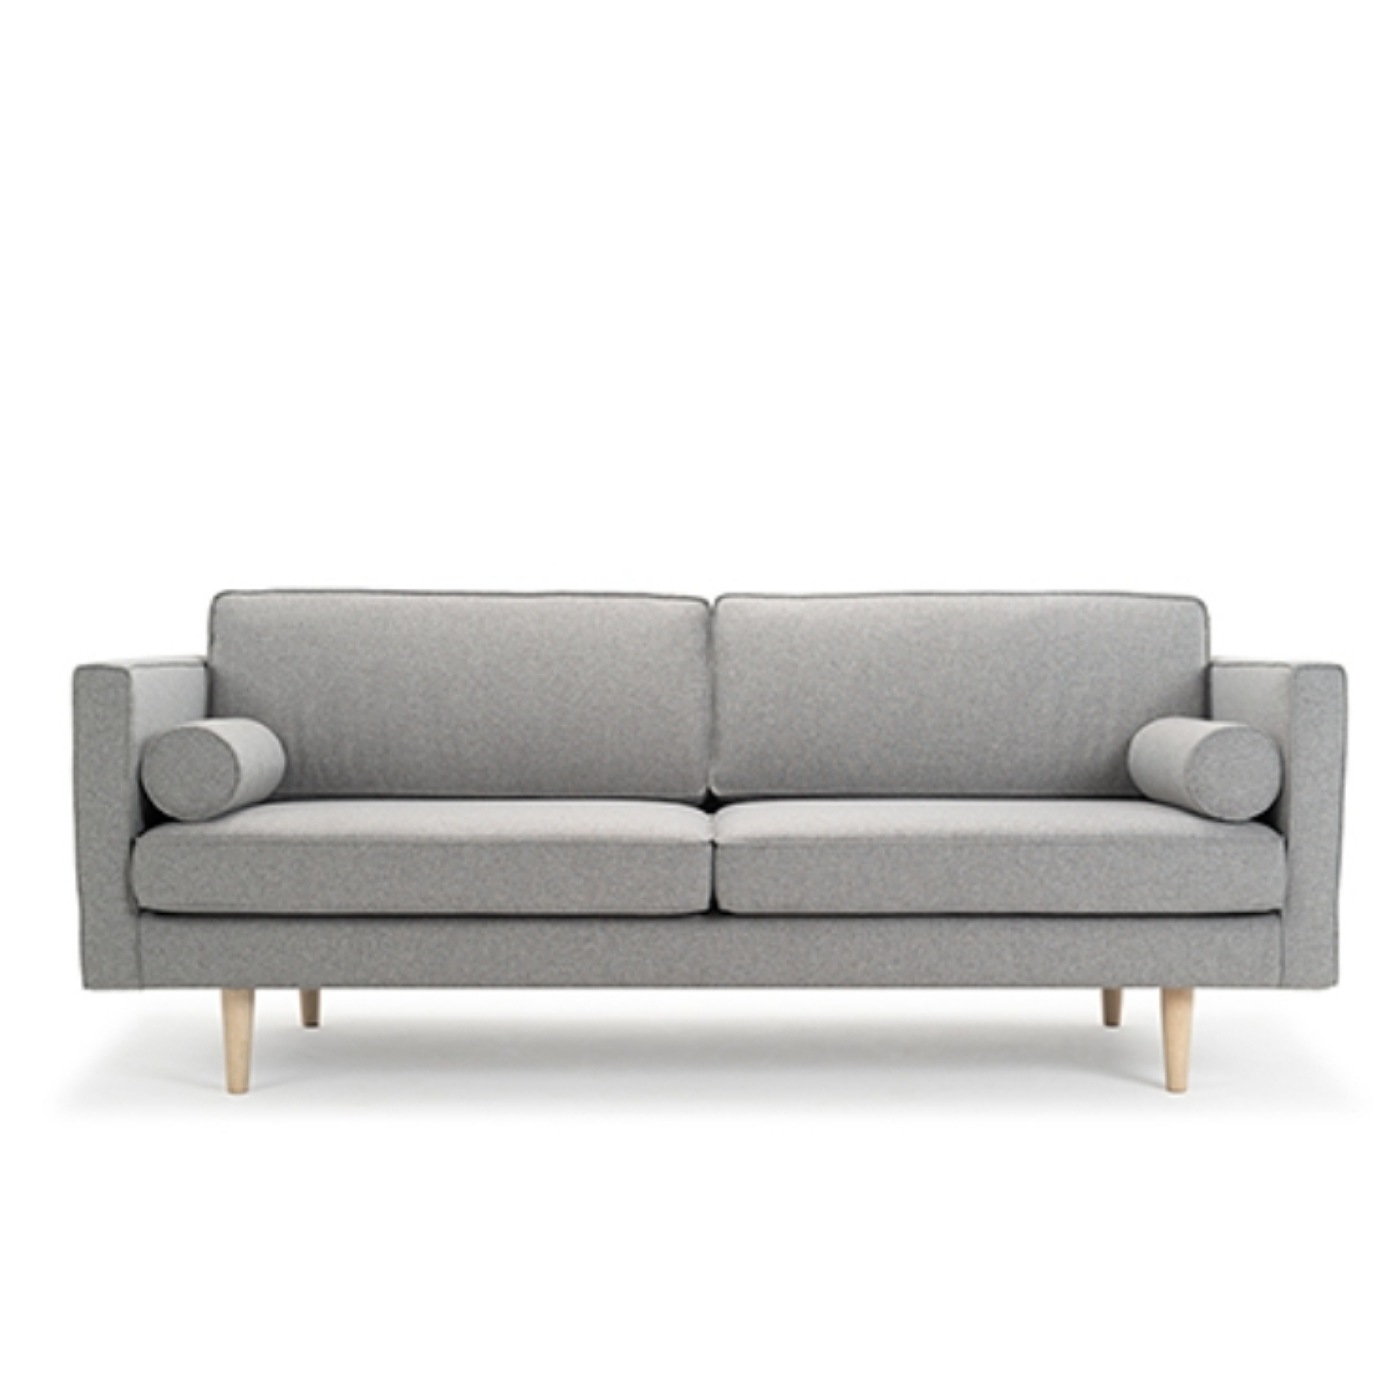 Grey Fabric Couch With Two Round Grey Cushions In The Corners.